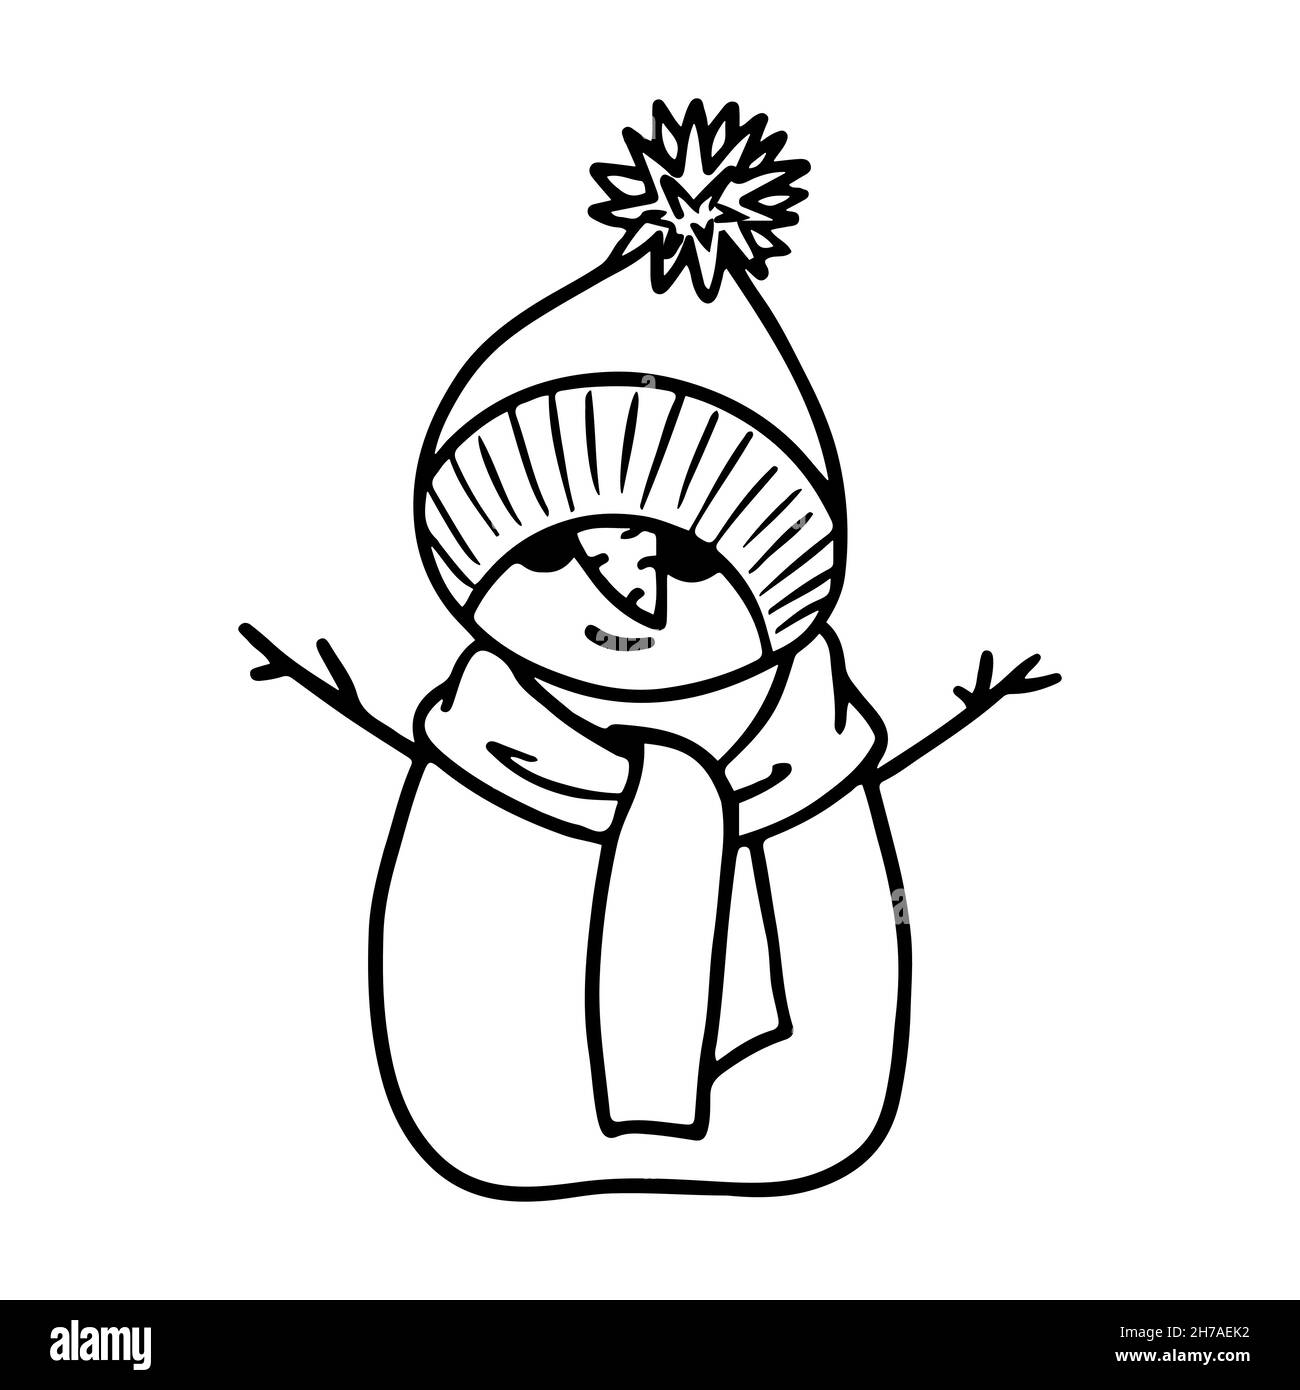 A cheerful snowman in a hat and scarf, isolated on a white background. Contour drawing. Doodle Stock Vector